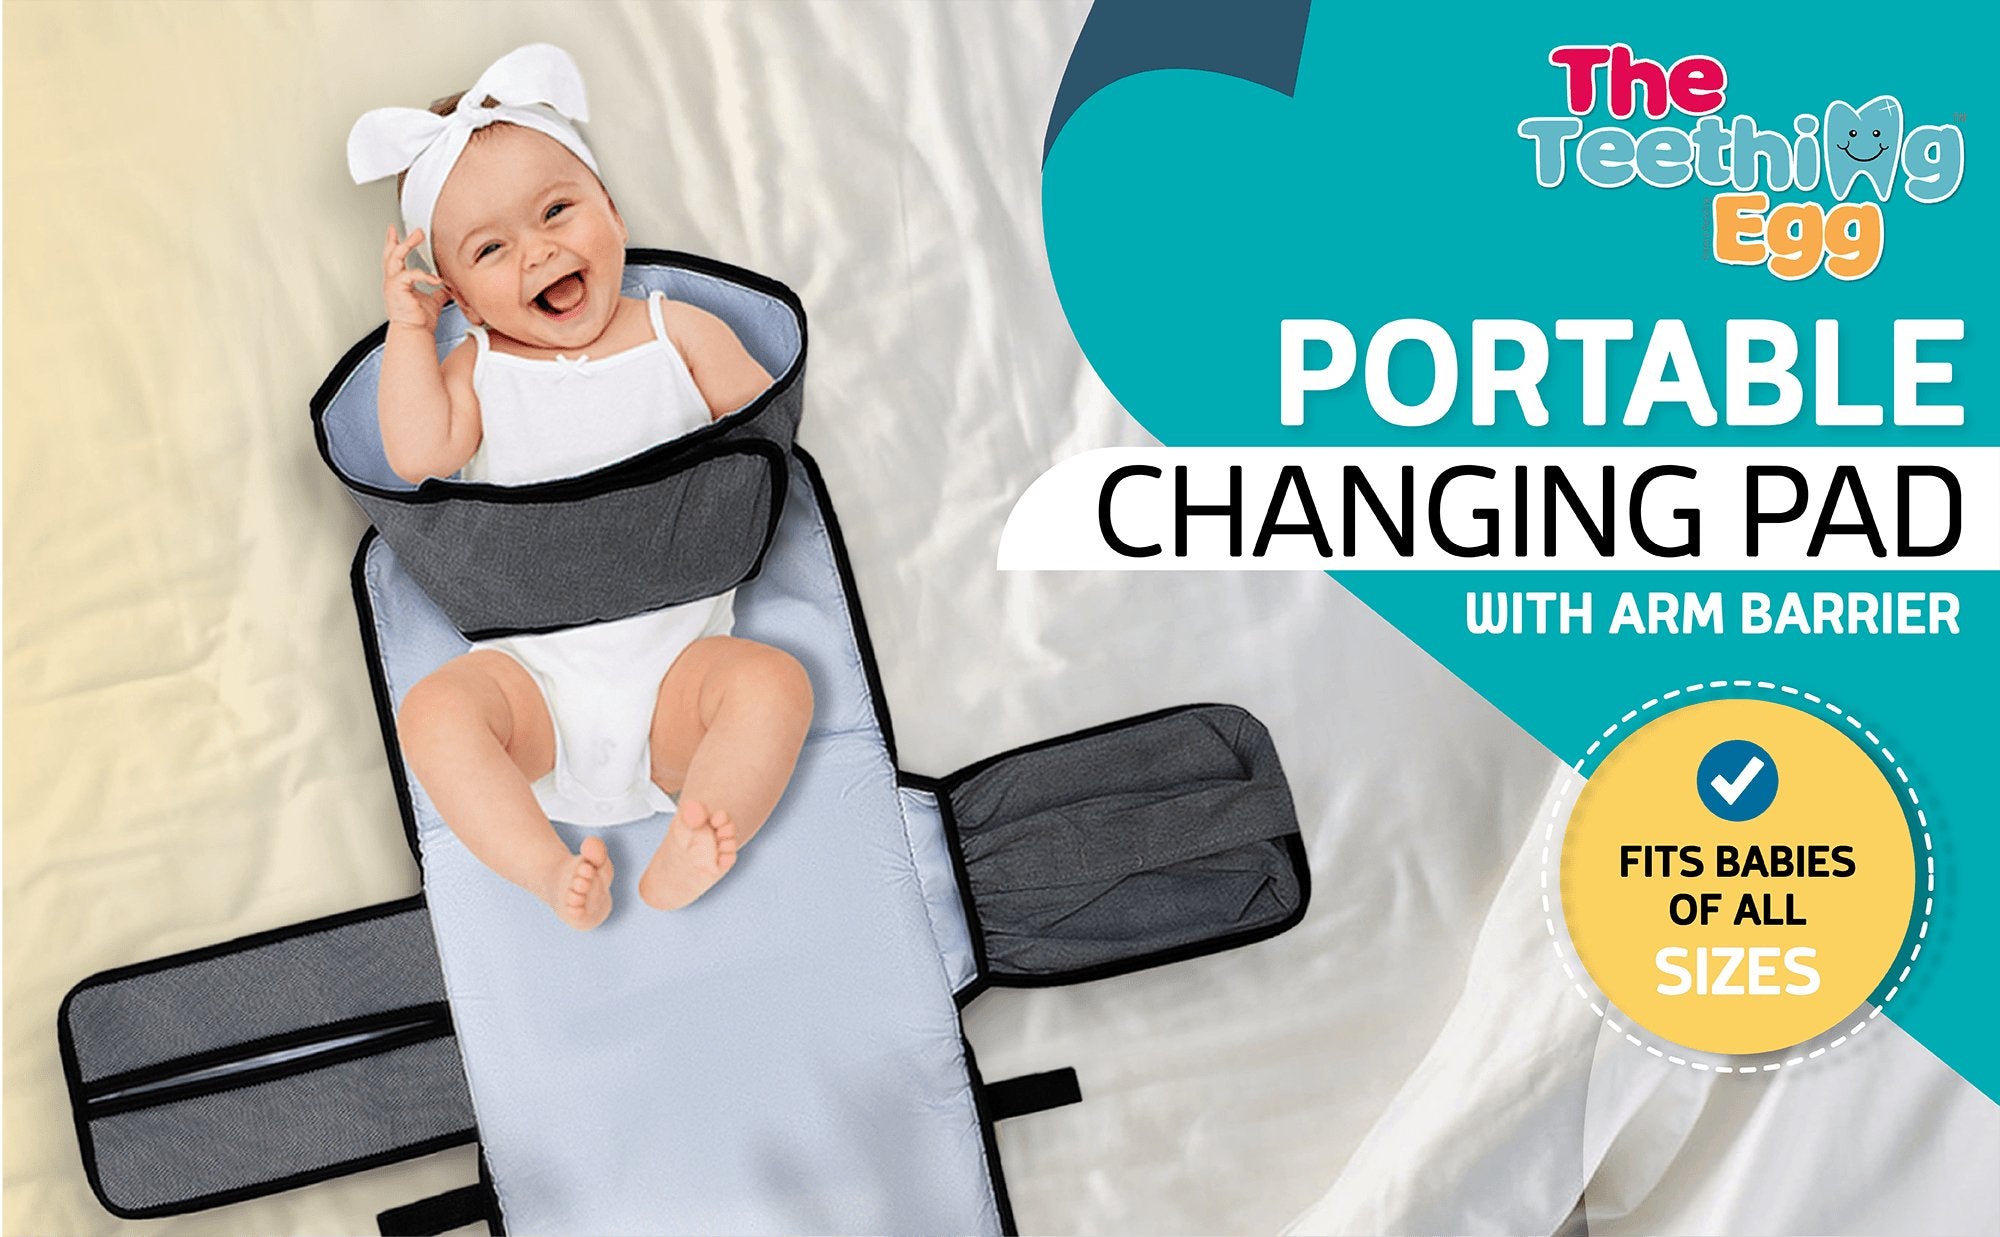 The Portable Diaper Changing Pad with Clean Hands Barrier The Teething Egg 